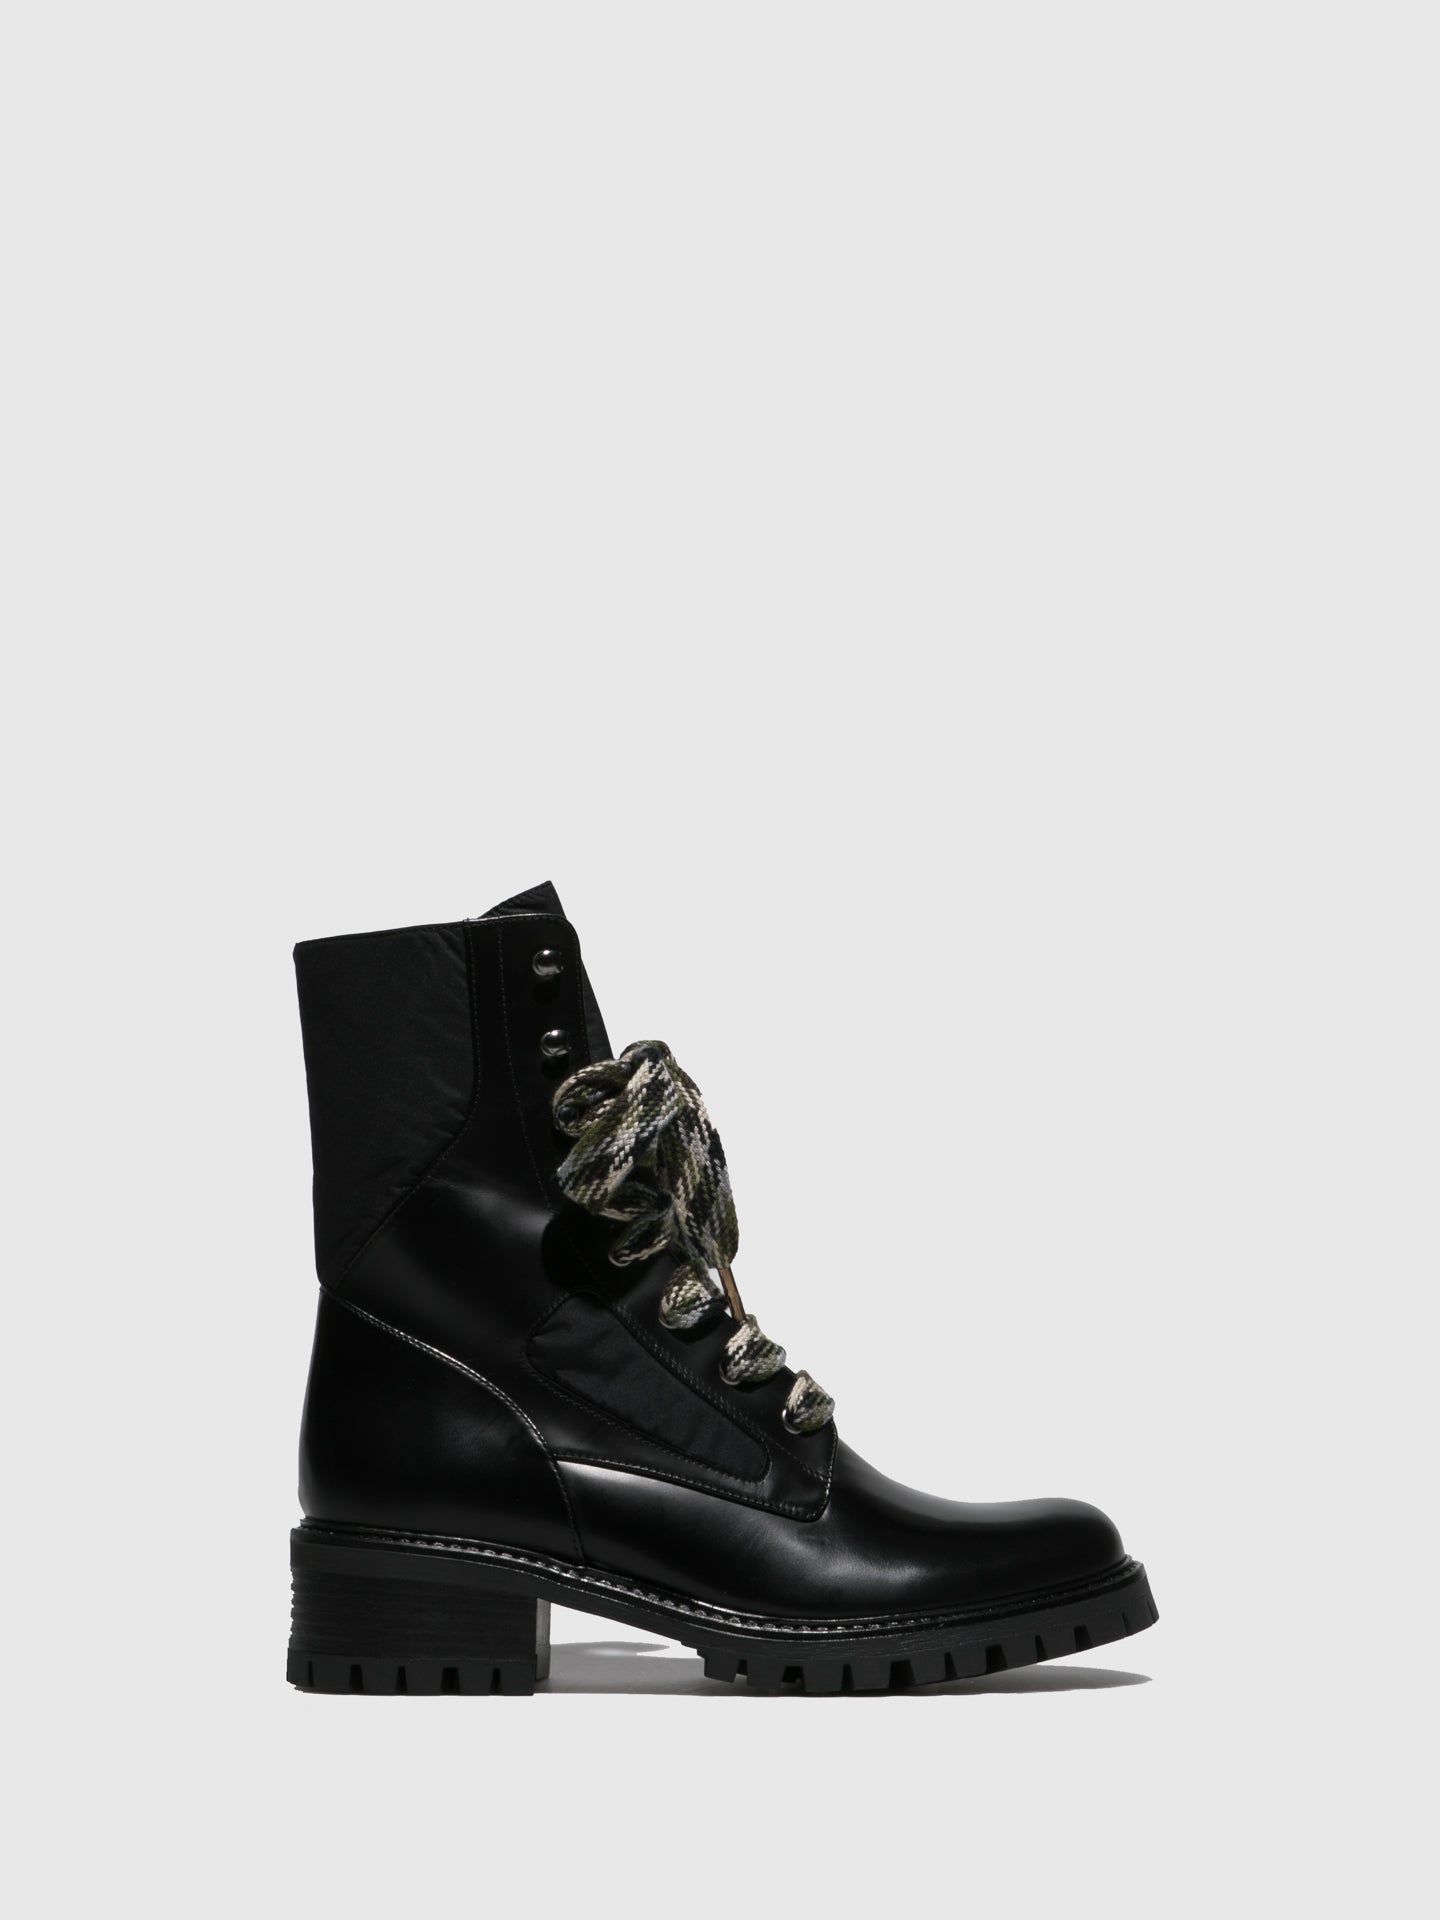 JJ Heitor Black Zip Up Ankle Boots